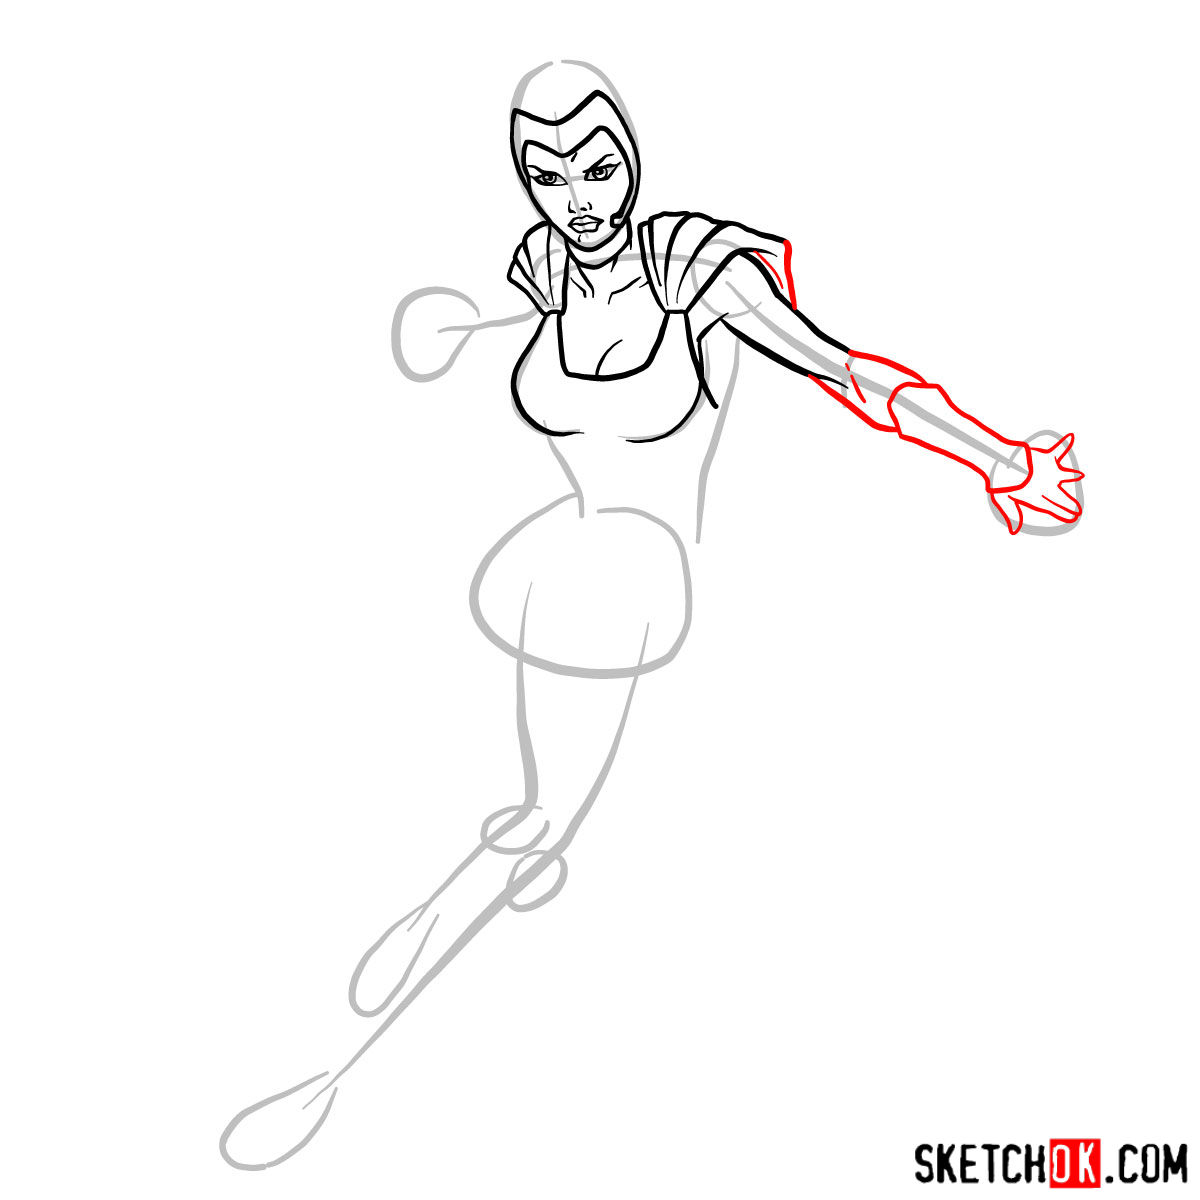 How to draw Polaris mutant from X-Men - step 06